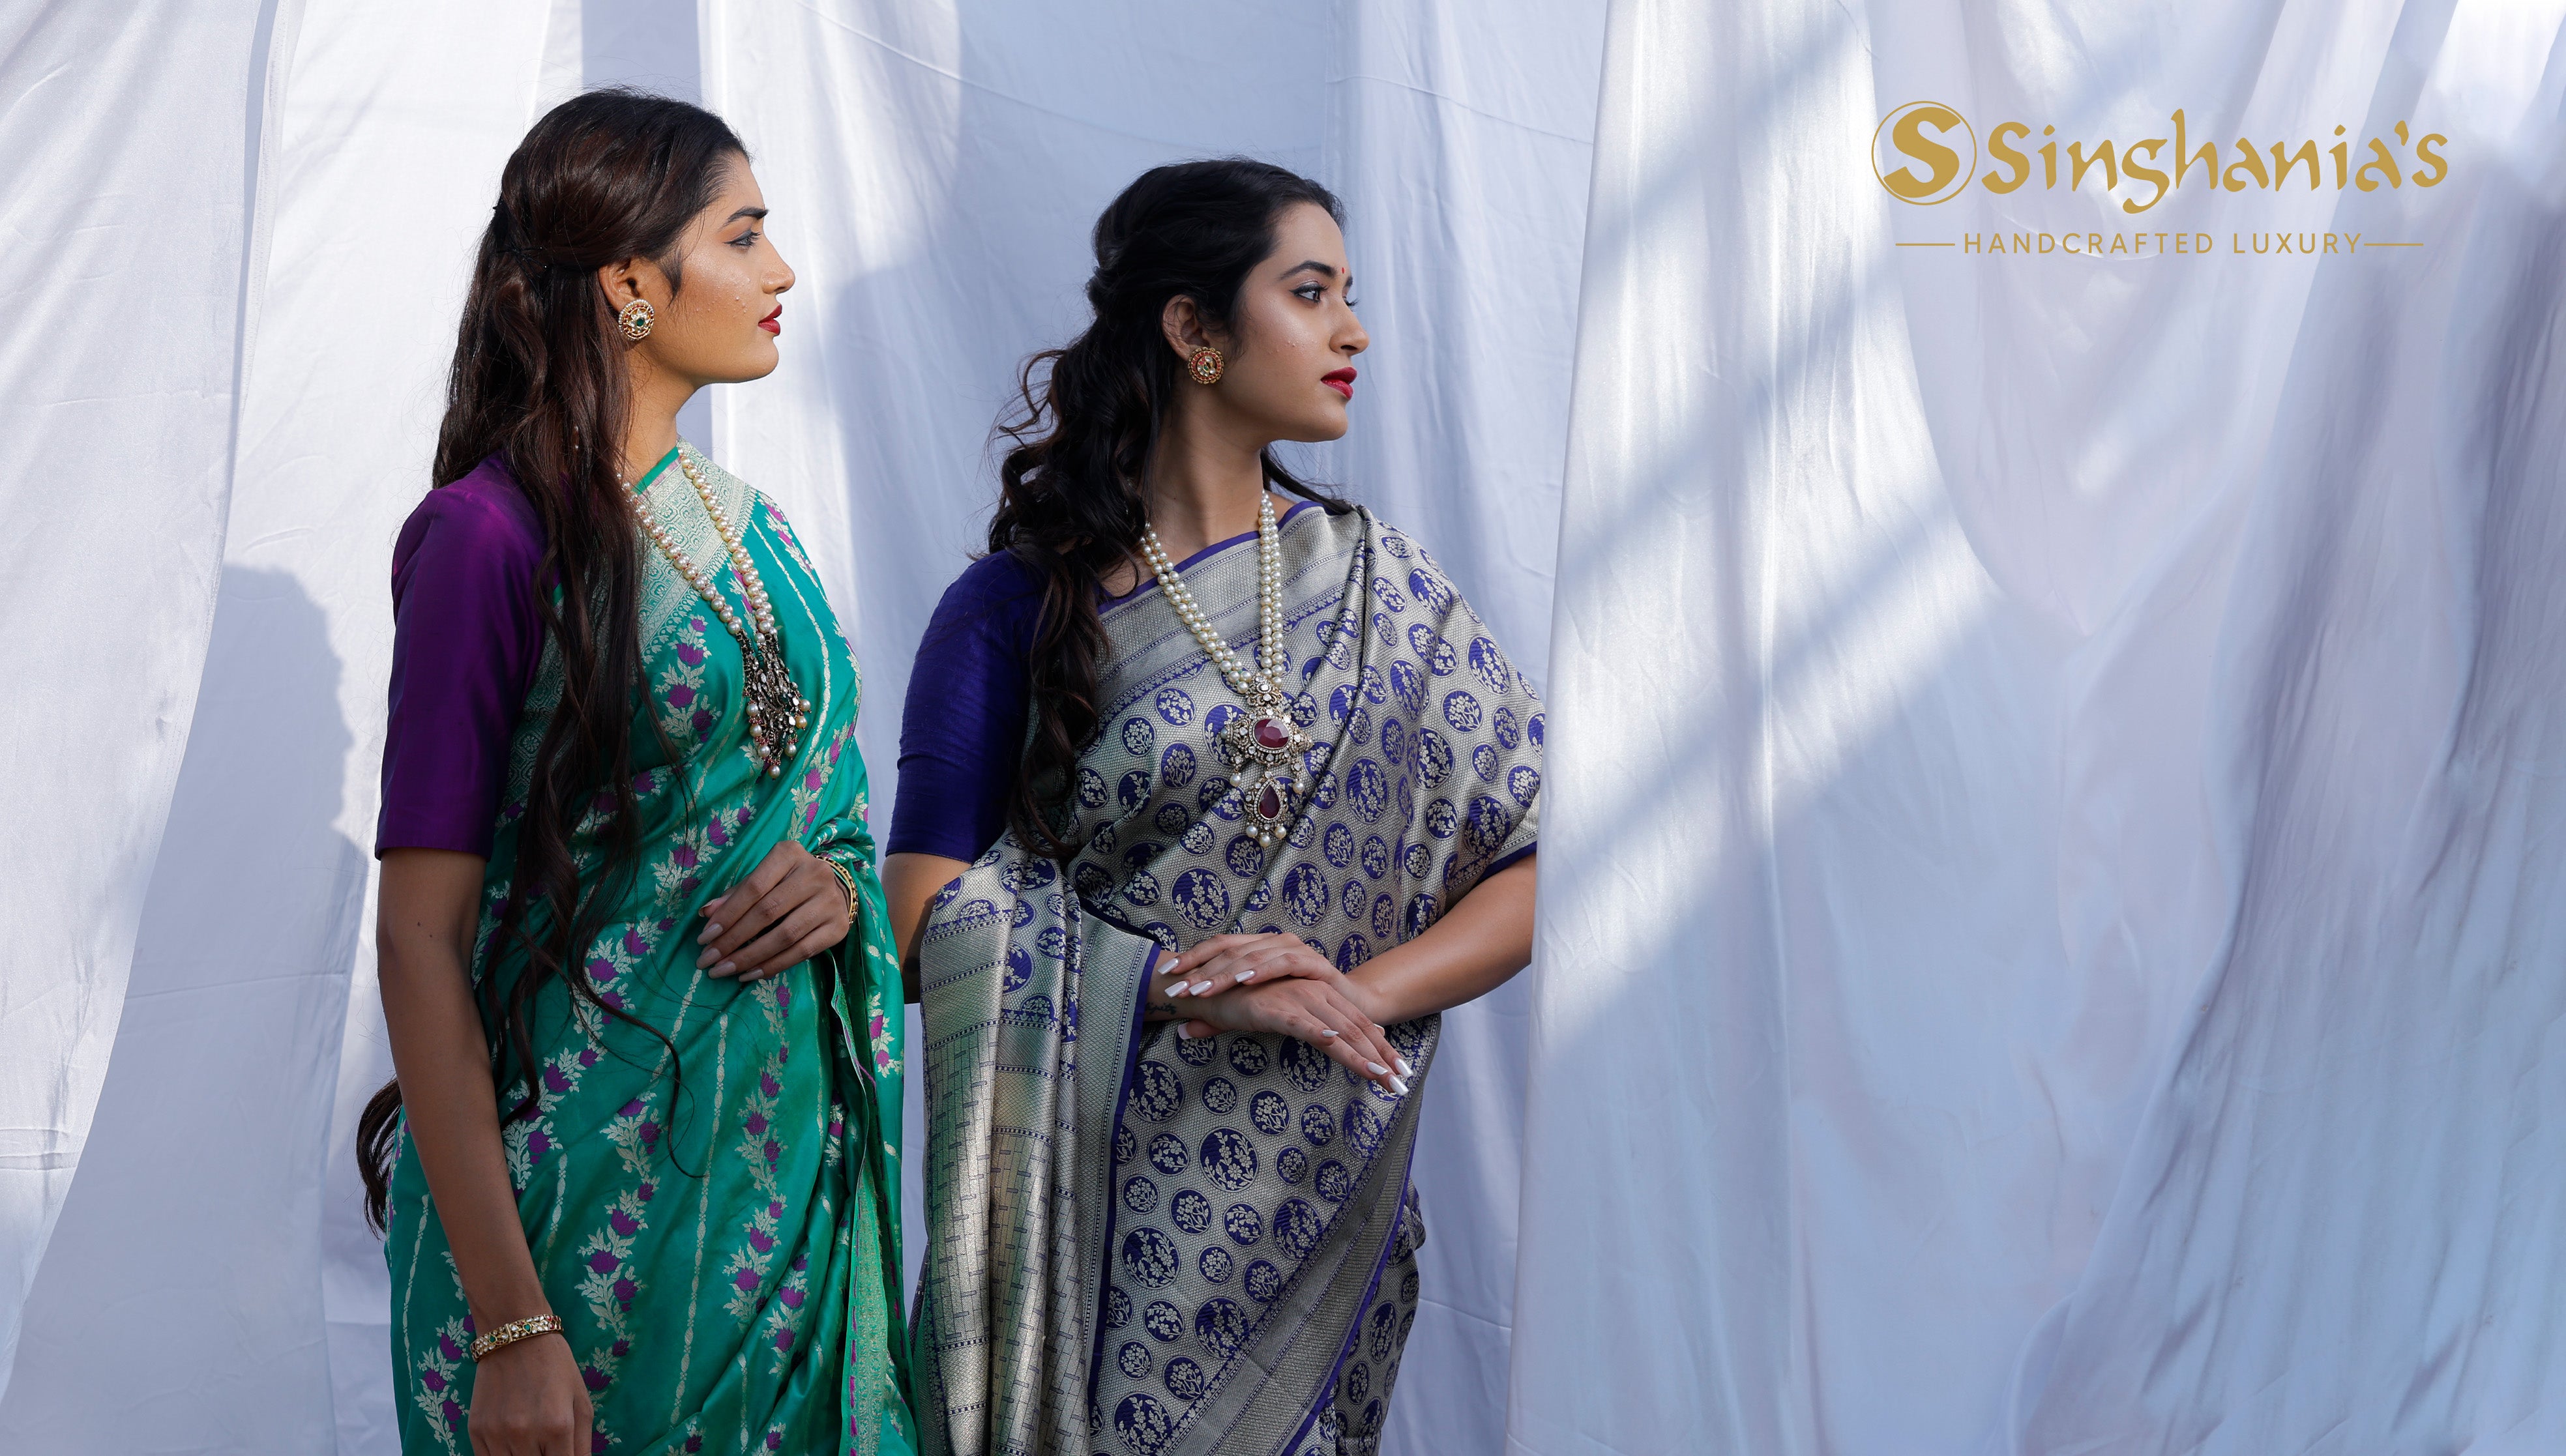 Saree Etiquette: Dos and Don'ts for Wearing Sarees with Grace